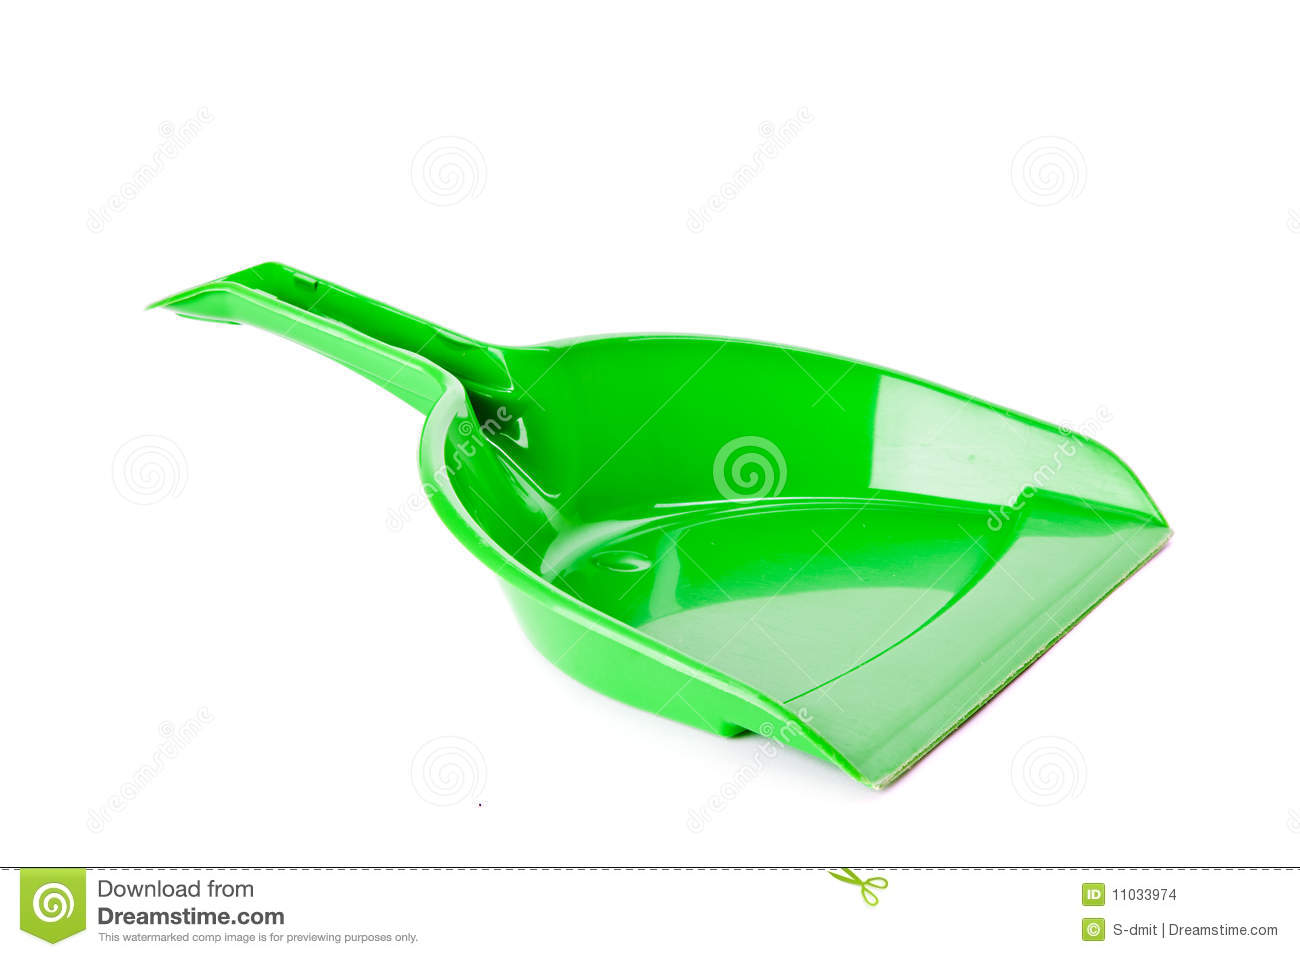 Dust Pan Stock Images   Image  11033974